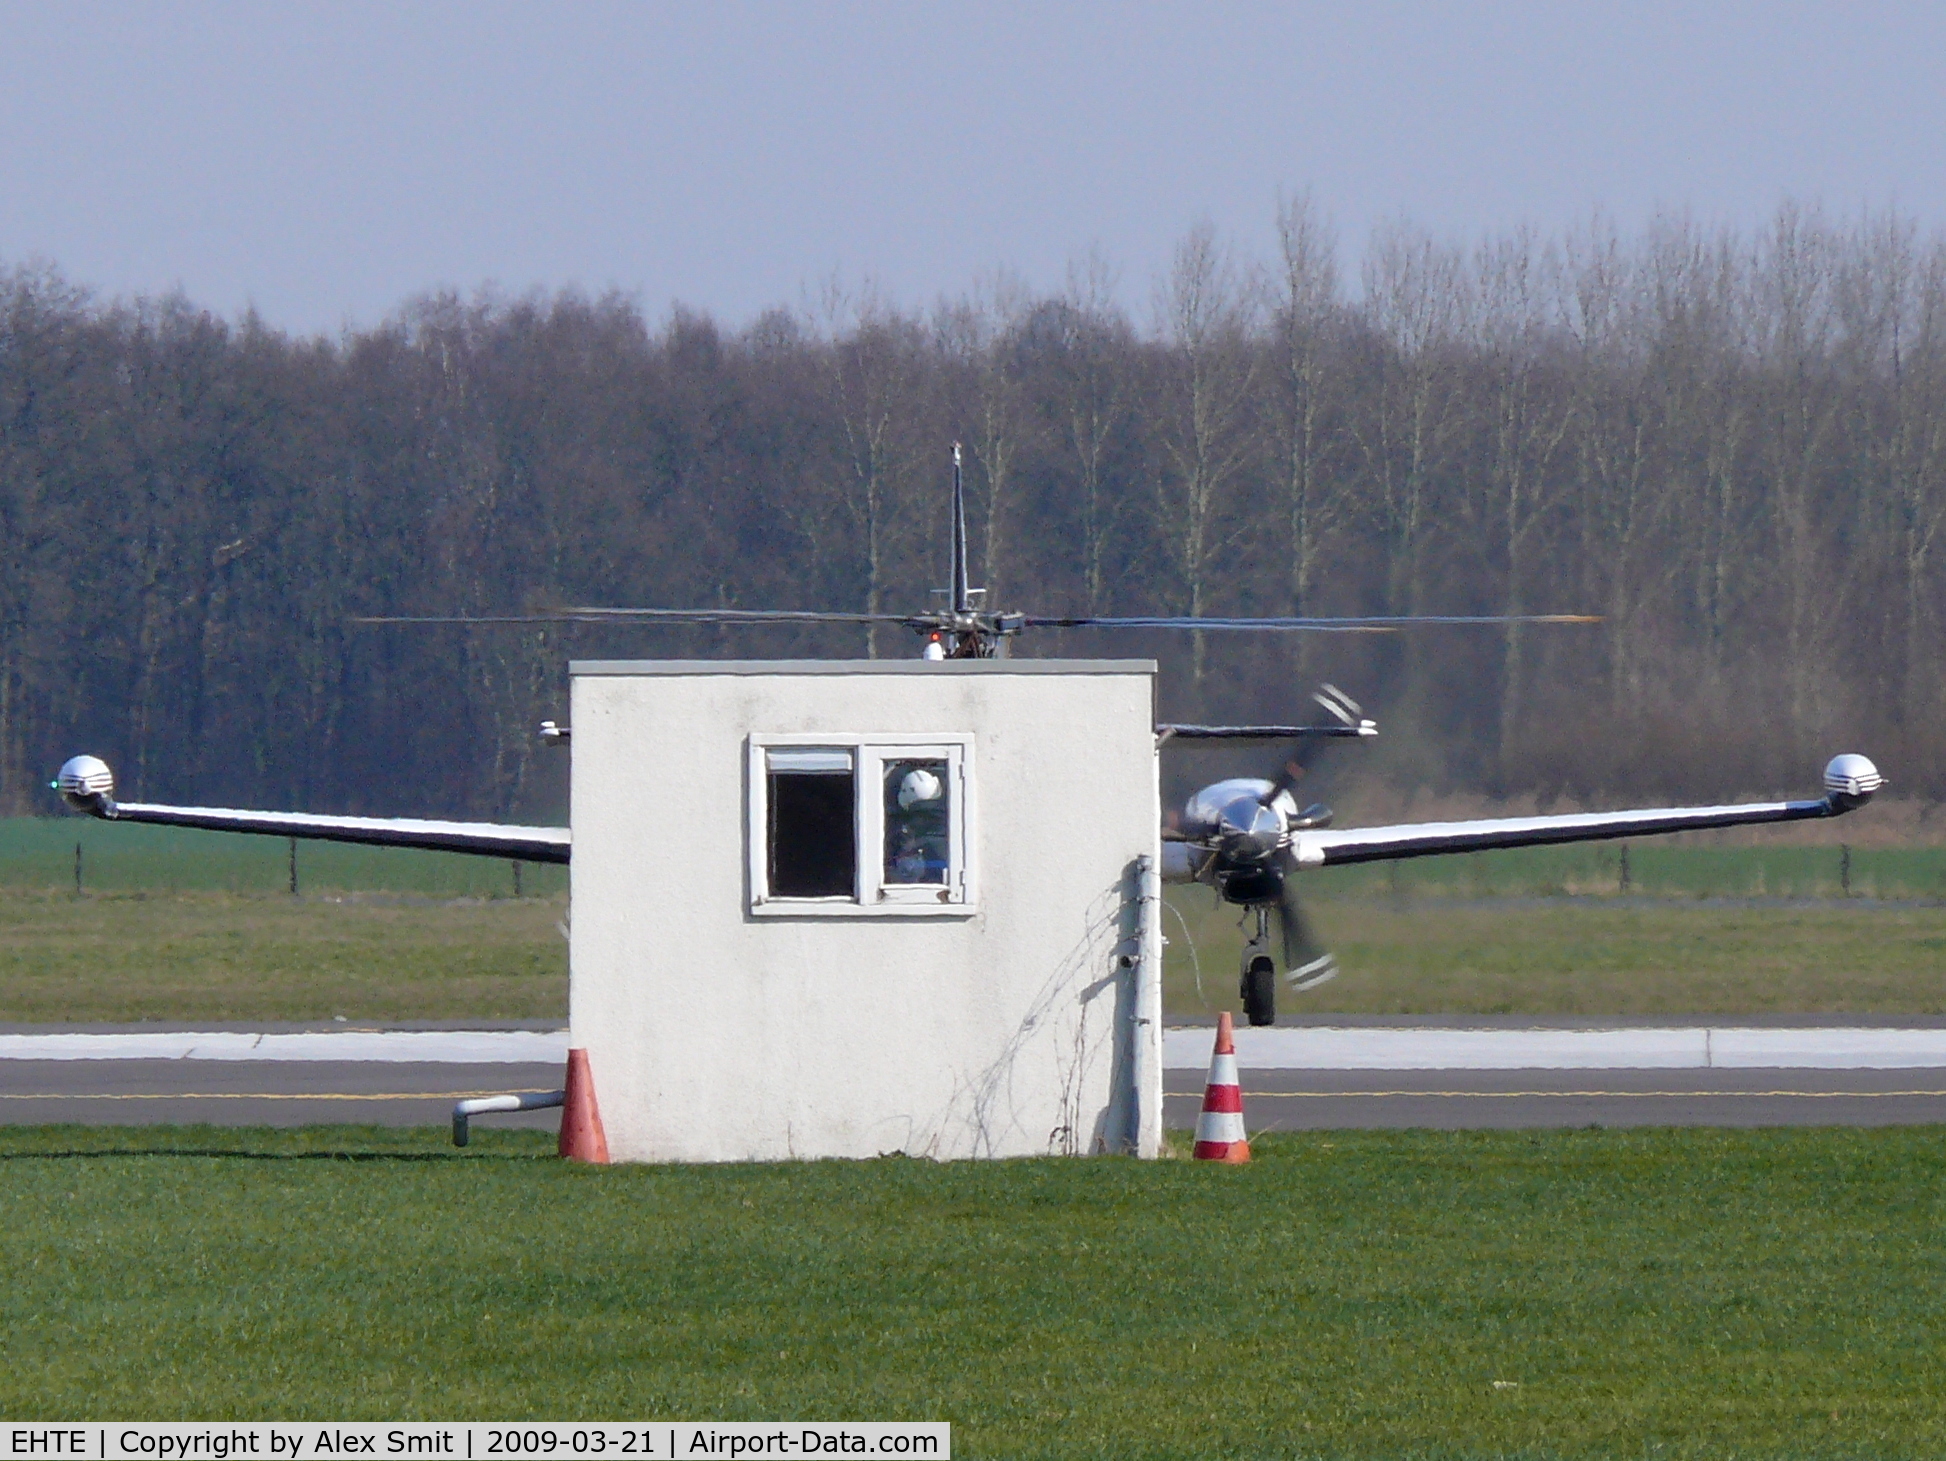 Teuge International Airport, Deventer Netherlands (EHTE) - Flying doghouse at Teuge Airport, notice the asymmetric propulsion on the wing and rooftop....... ;-)